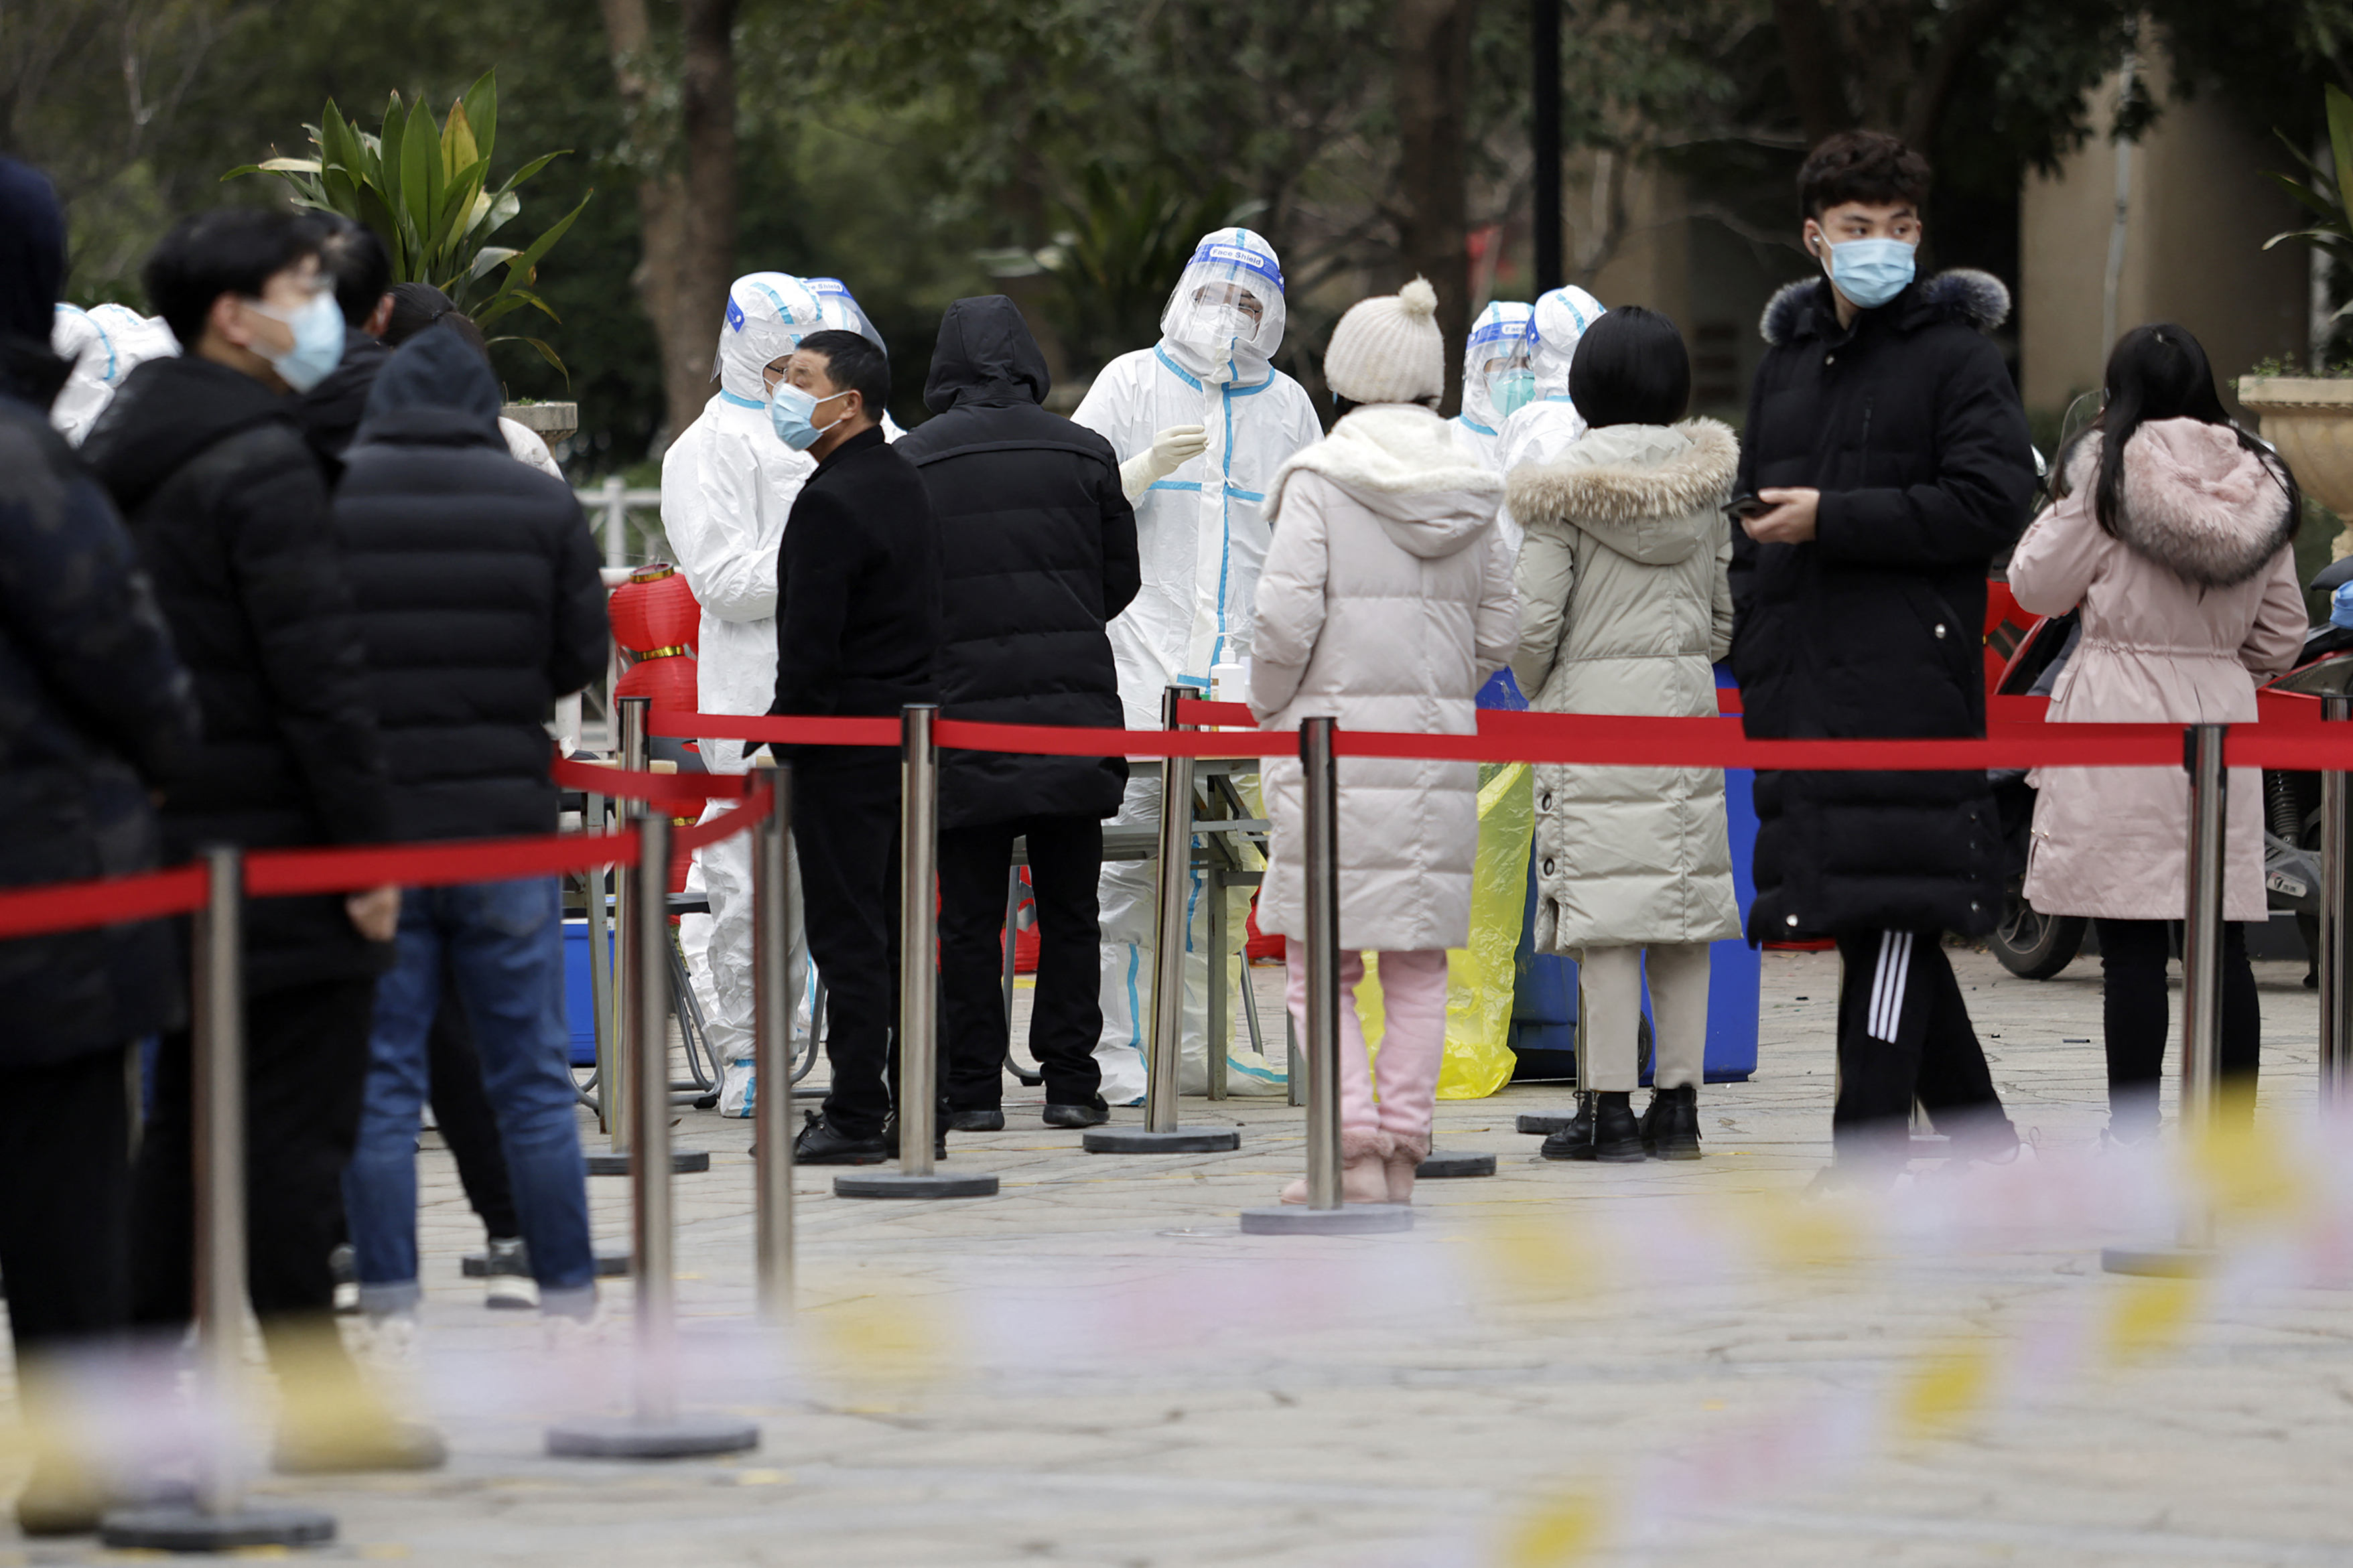 Suzhou Students Outraged When Their Apartments Are Emptied to Become Quarantine Sites